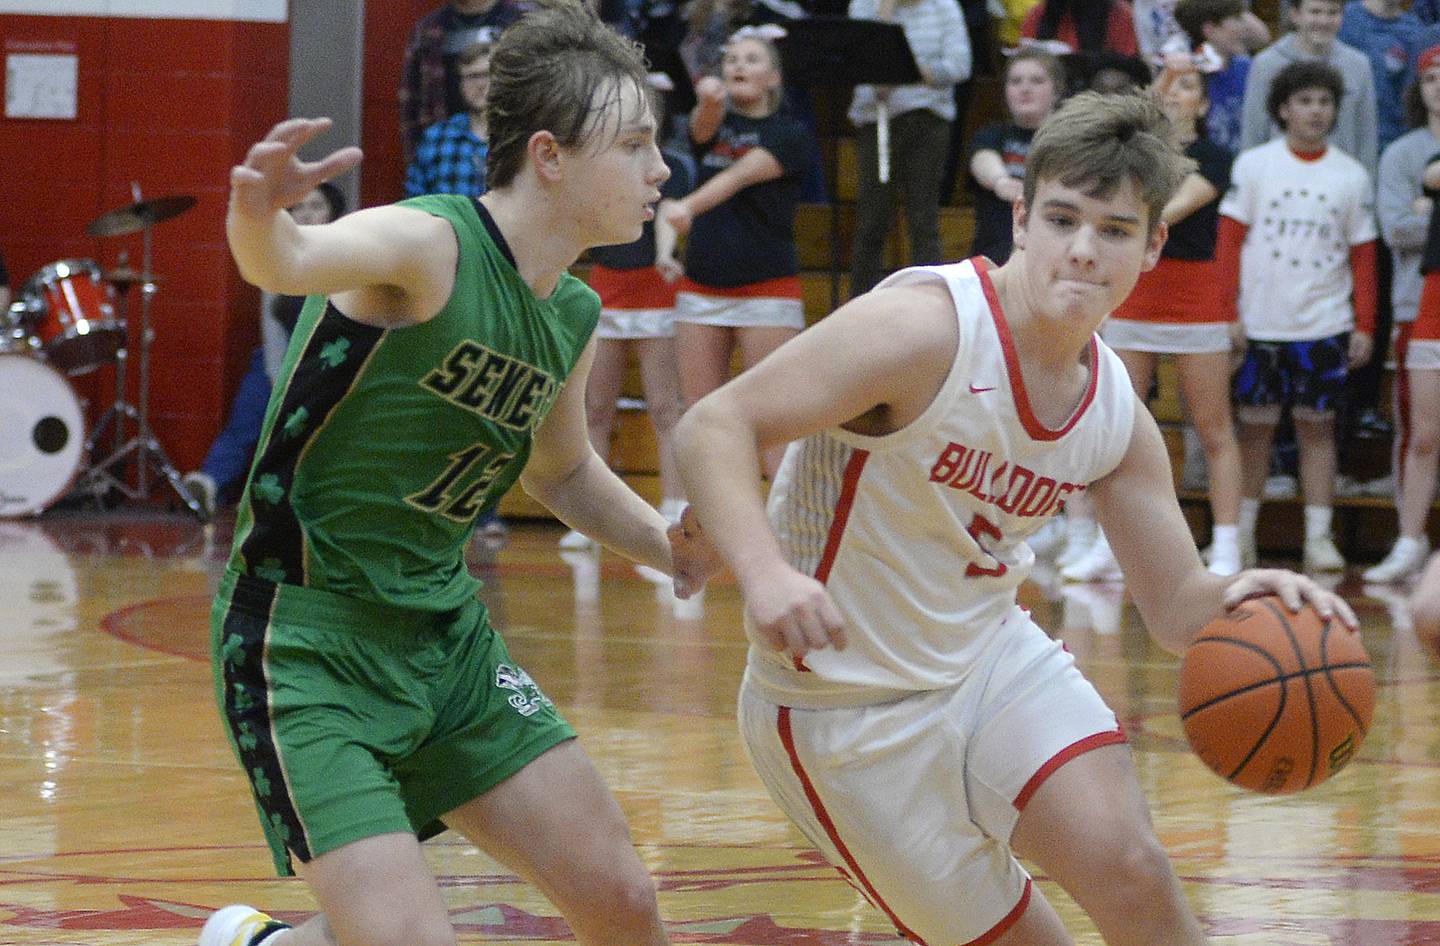 Streator’s Adam Williamson drives past Seneca’s Braden Ellis in the 2nd period in Pops Dale Gymnasium on Tuesday Feb. 7, 2023 at Streator High School.